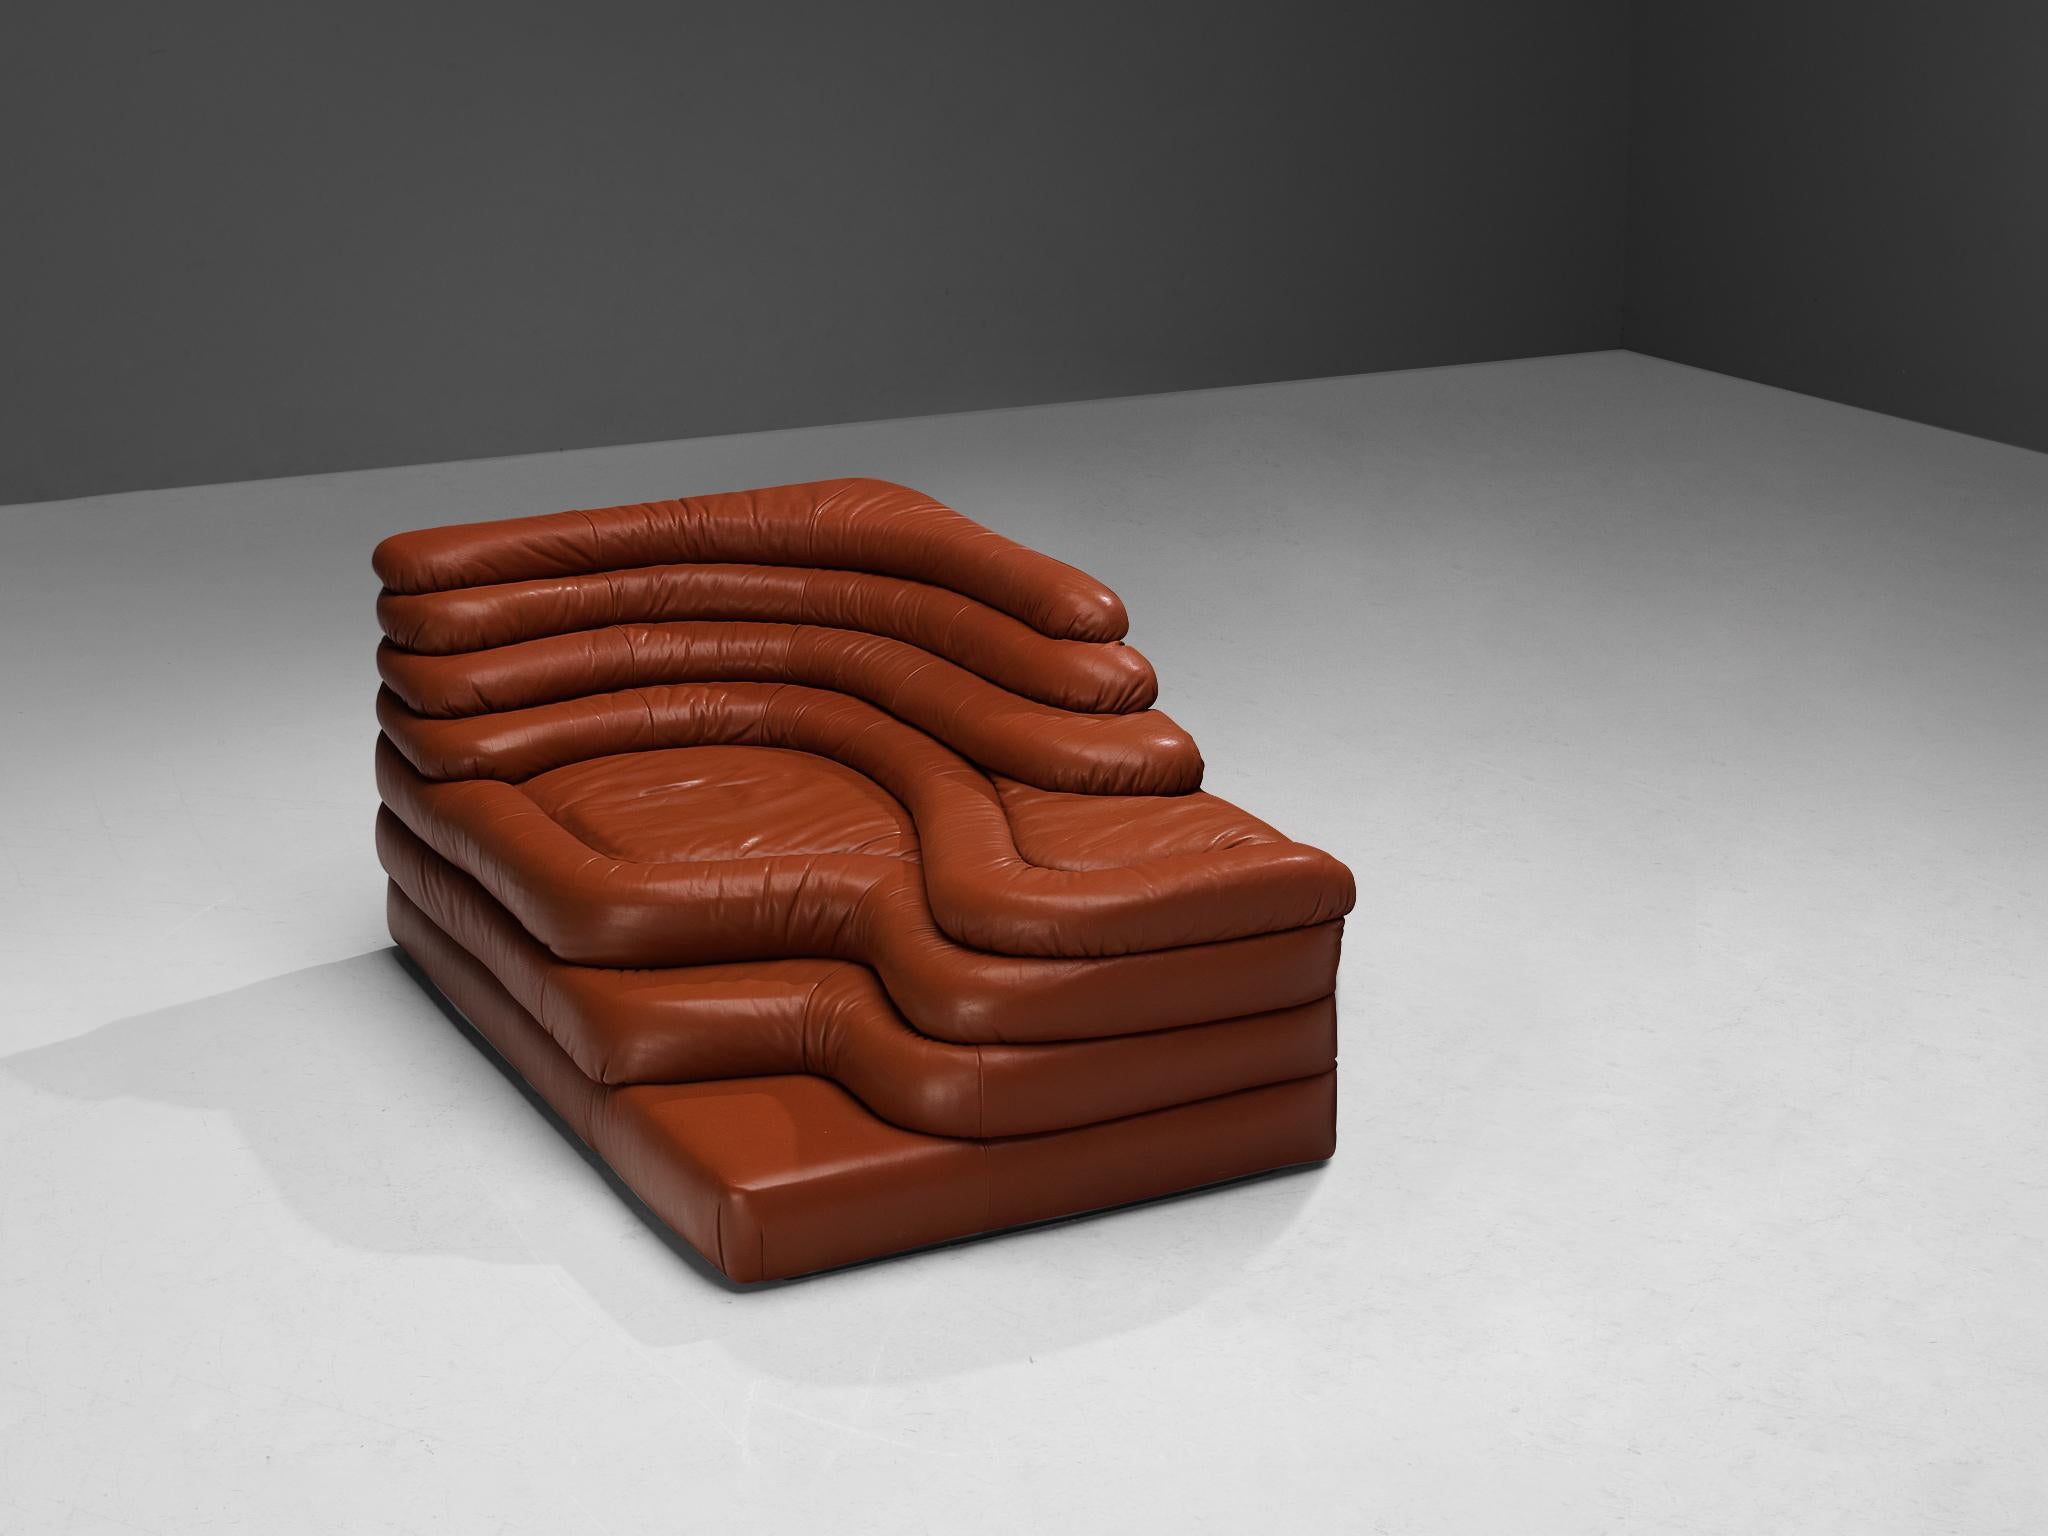 Ubald Klug for De Sede, DS-1025 'Terrazza' landscape sofa, in red leather, Switzerland, 1970s. 

Waterfall shaped sofa in red brown leather by the Swiss manufacturer De Sede. The design for this sofa was inspired by mountains and especially the